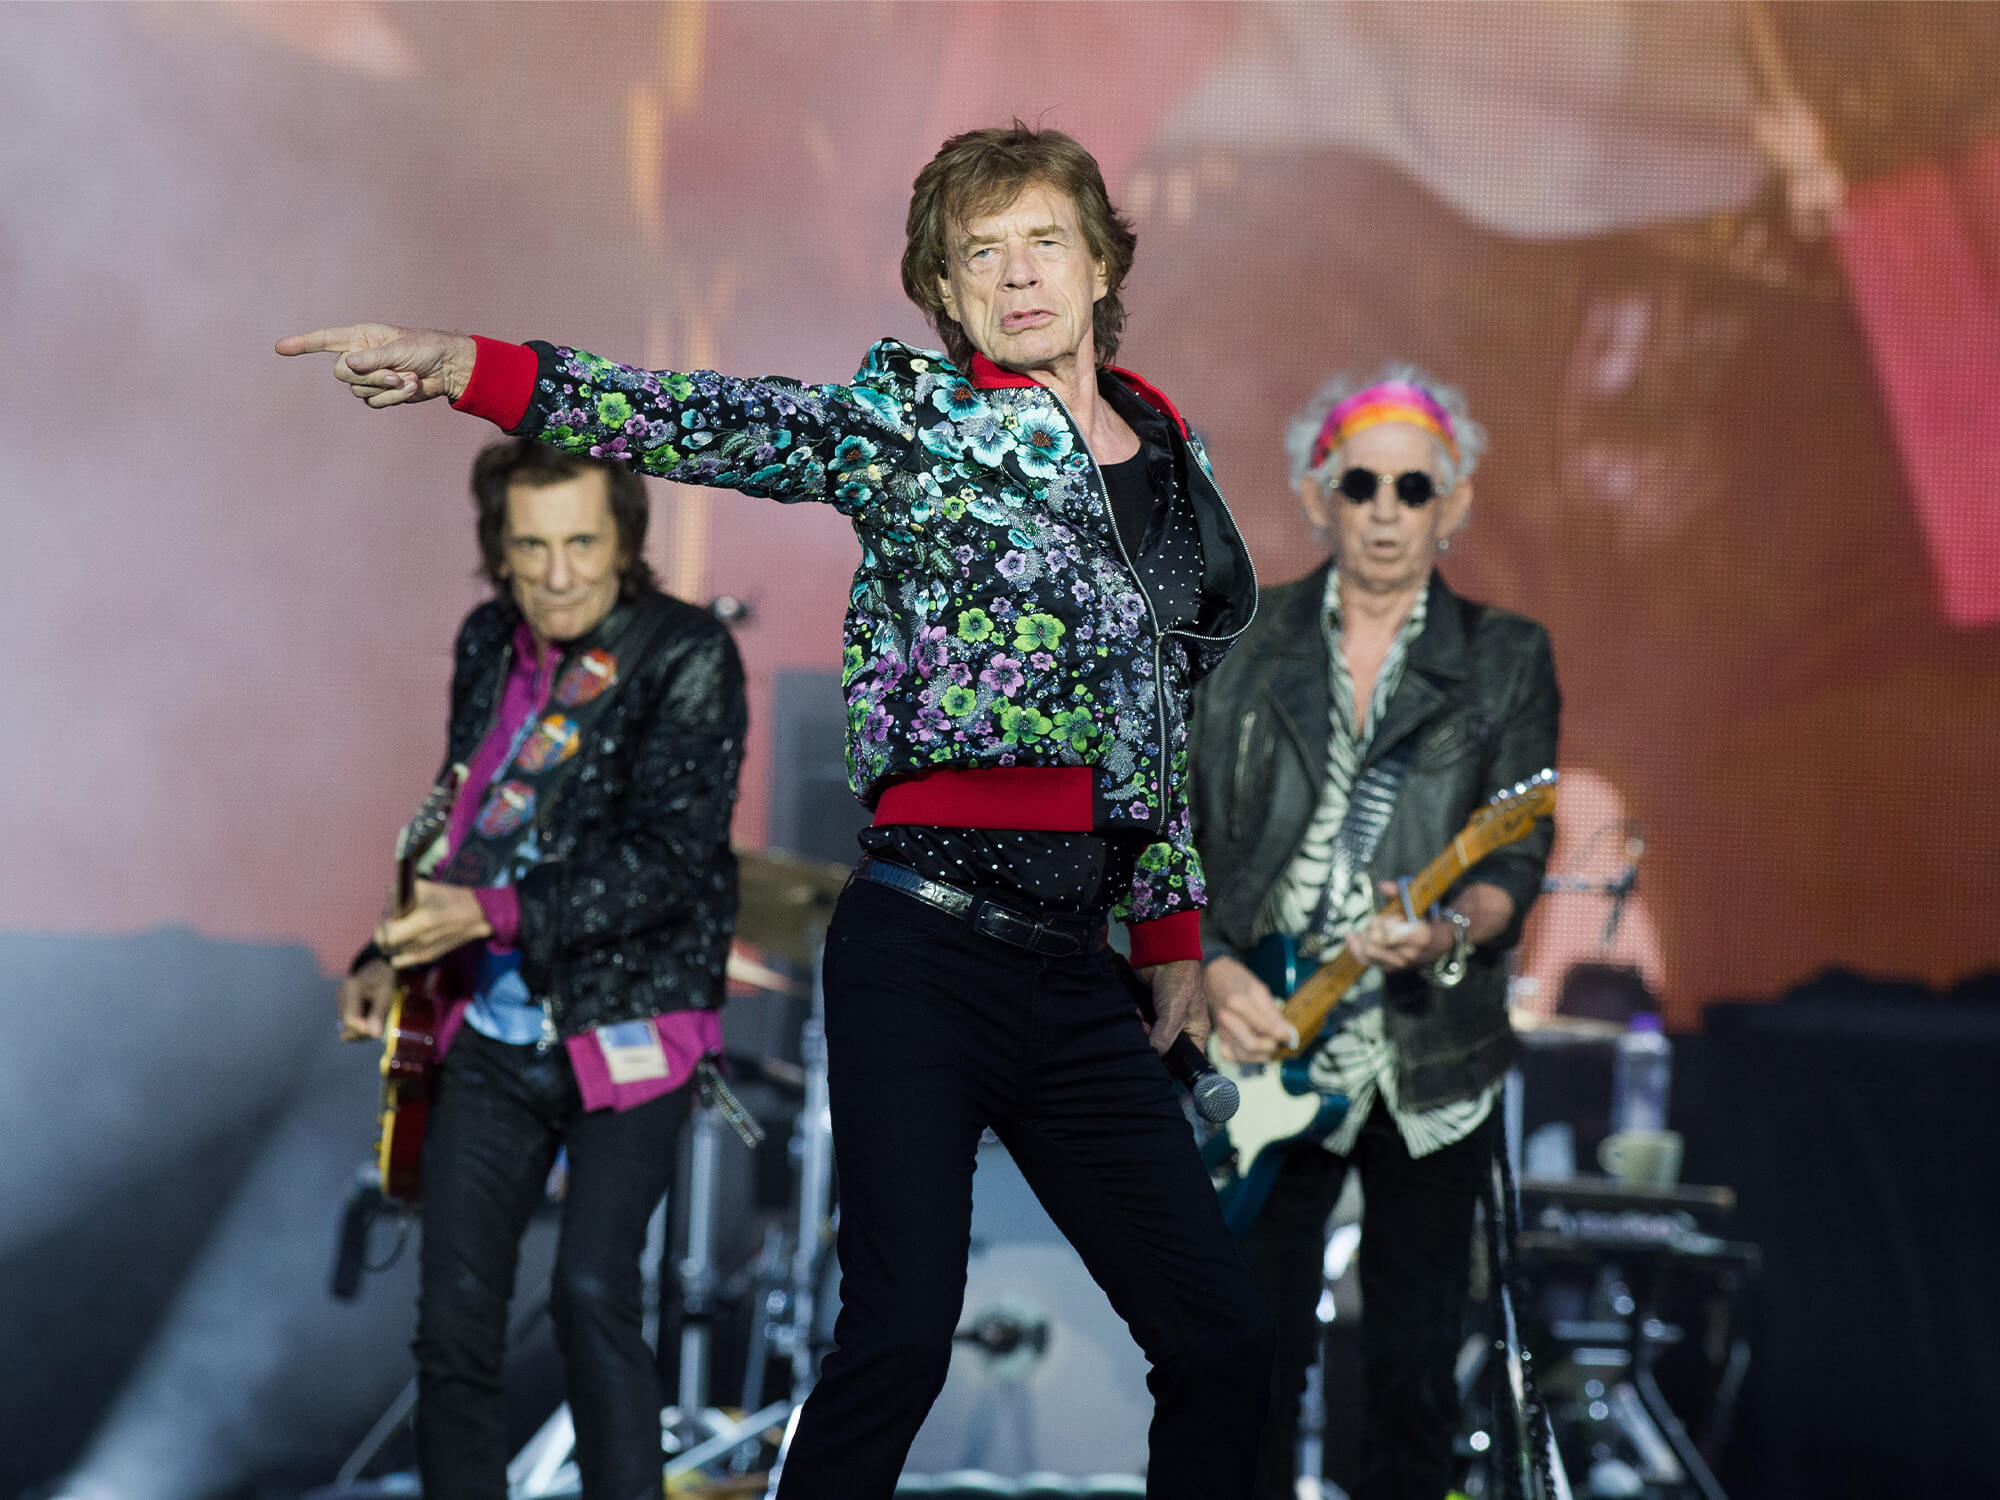 Rolling Stones on stage. Mick Jagger is standing in the middle and pointing to his right. Kieth Richards and Ronnie Wood stand behind him.